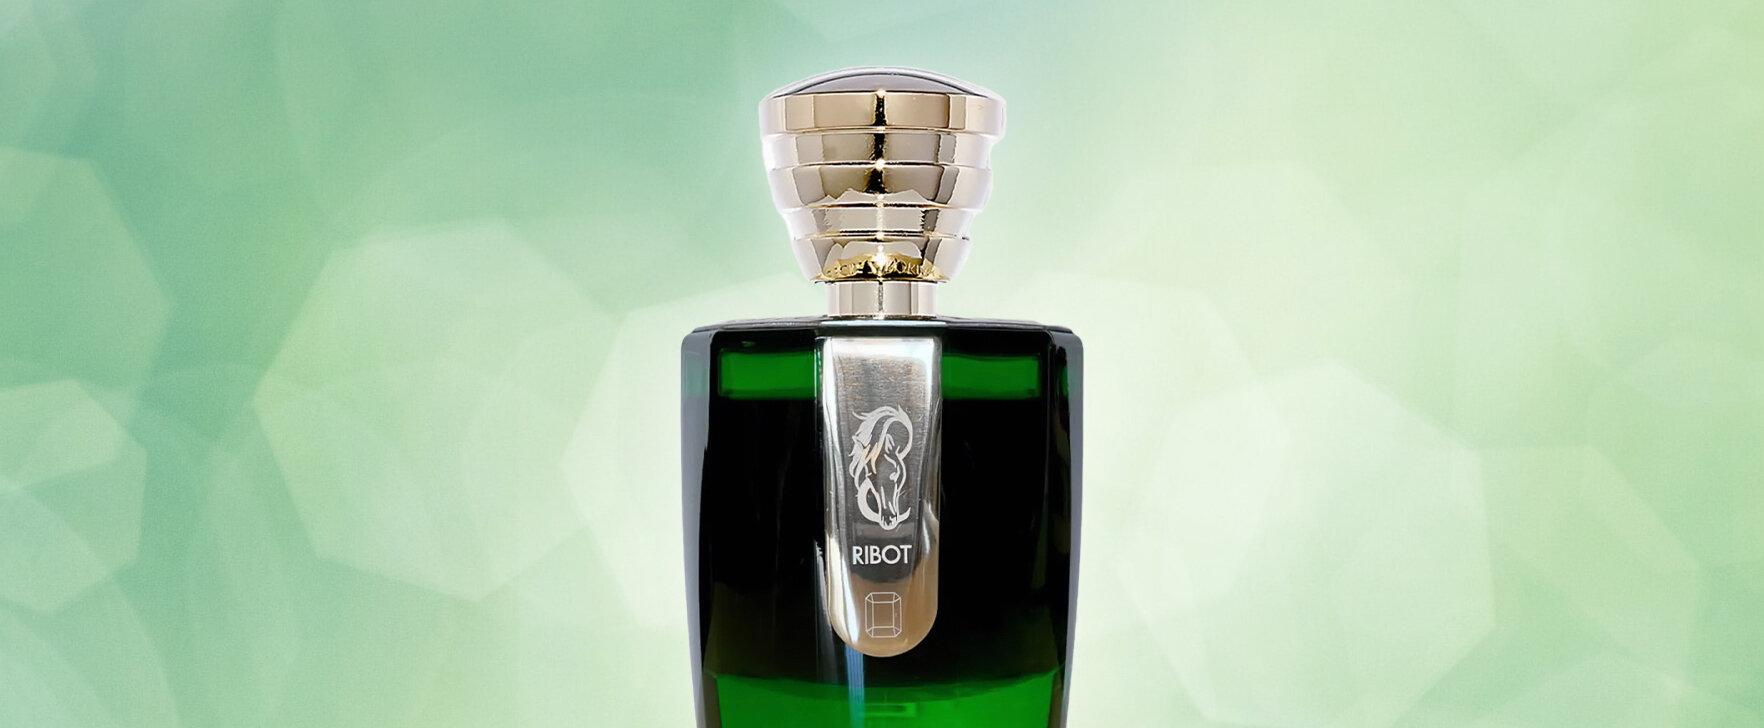 Inspired by Horse Racing: The New "Ribot" Extrait de Parfum From Masque